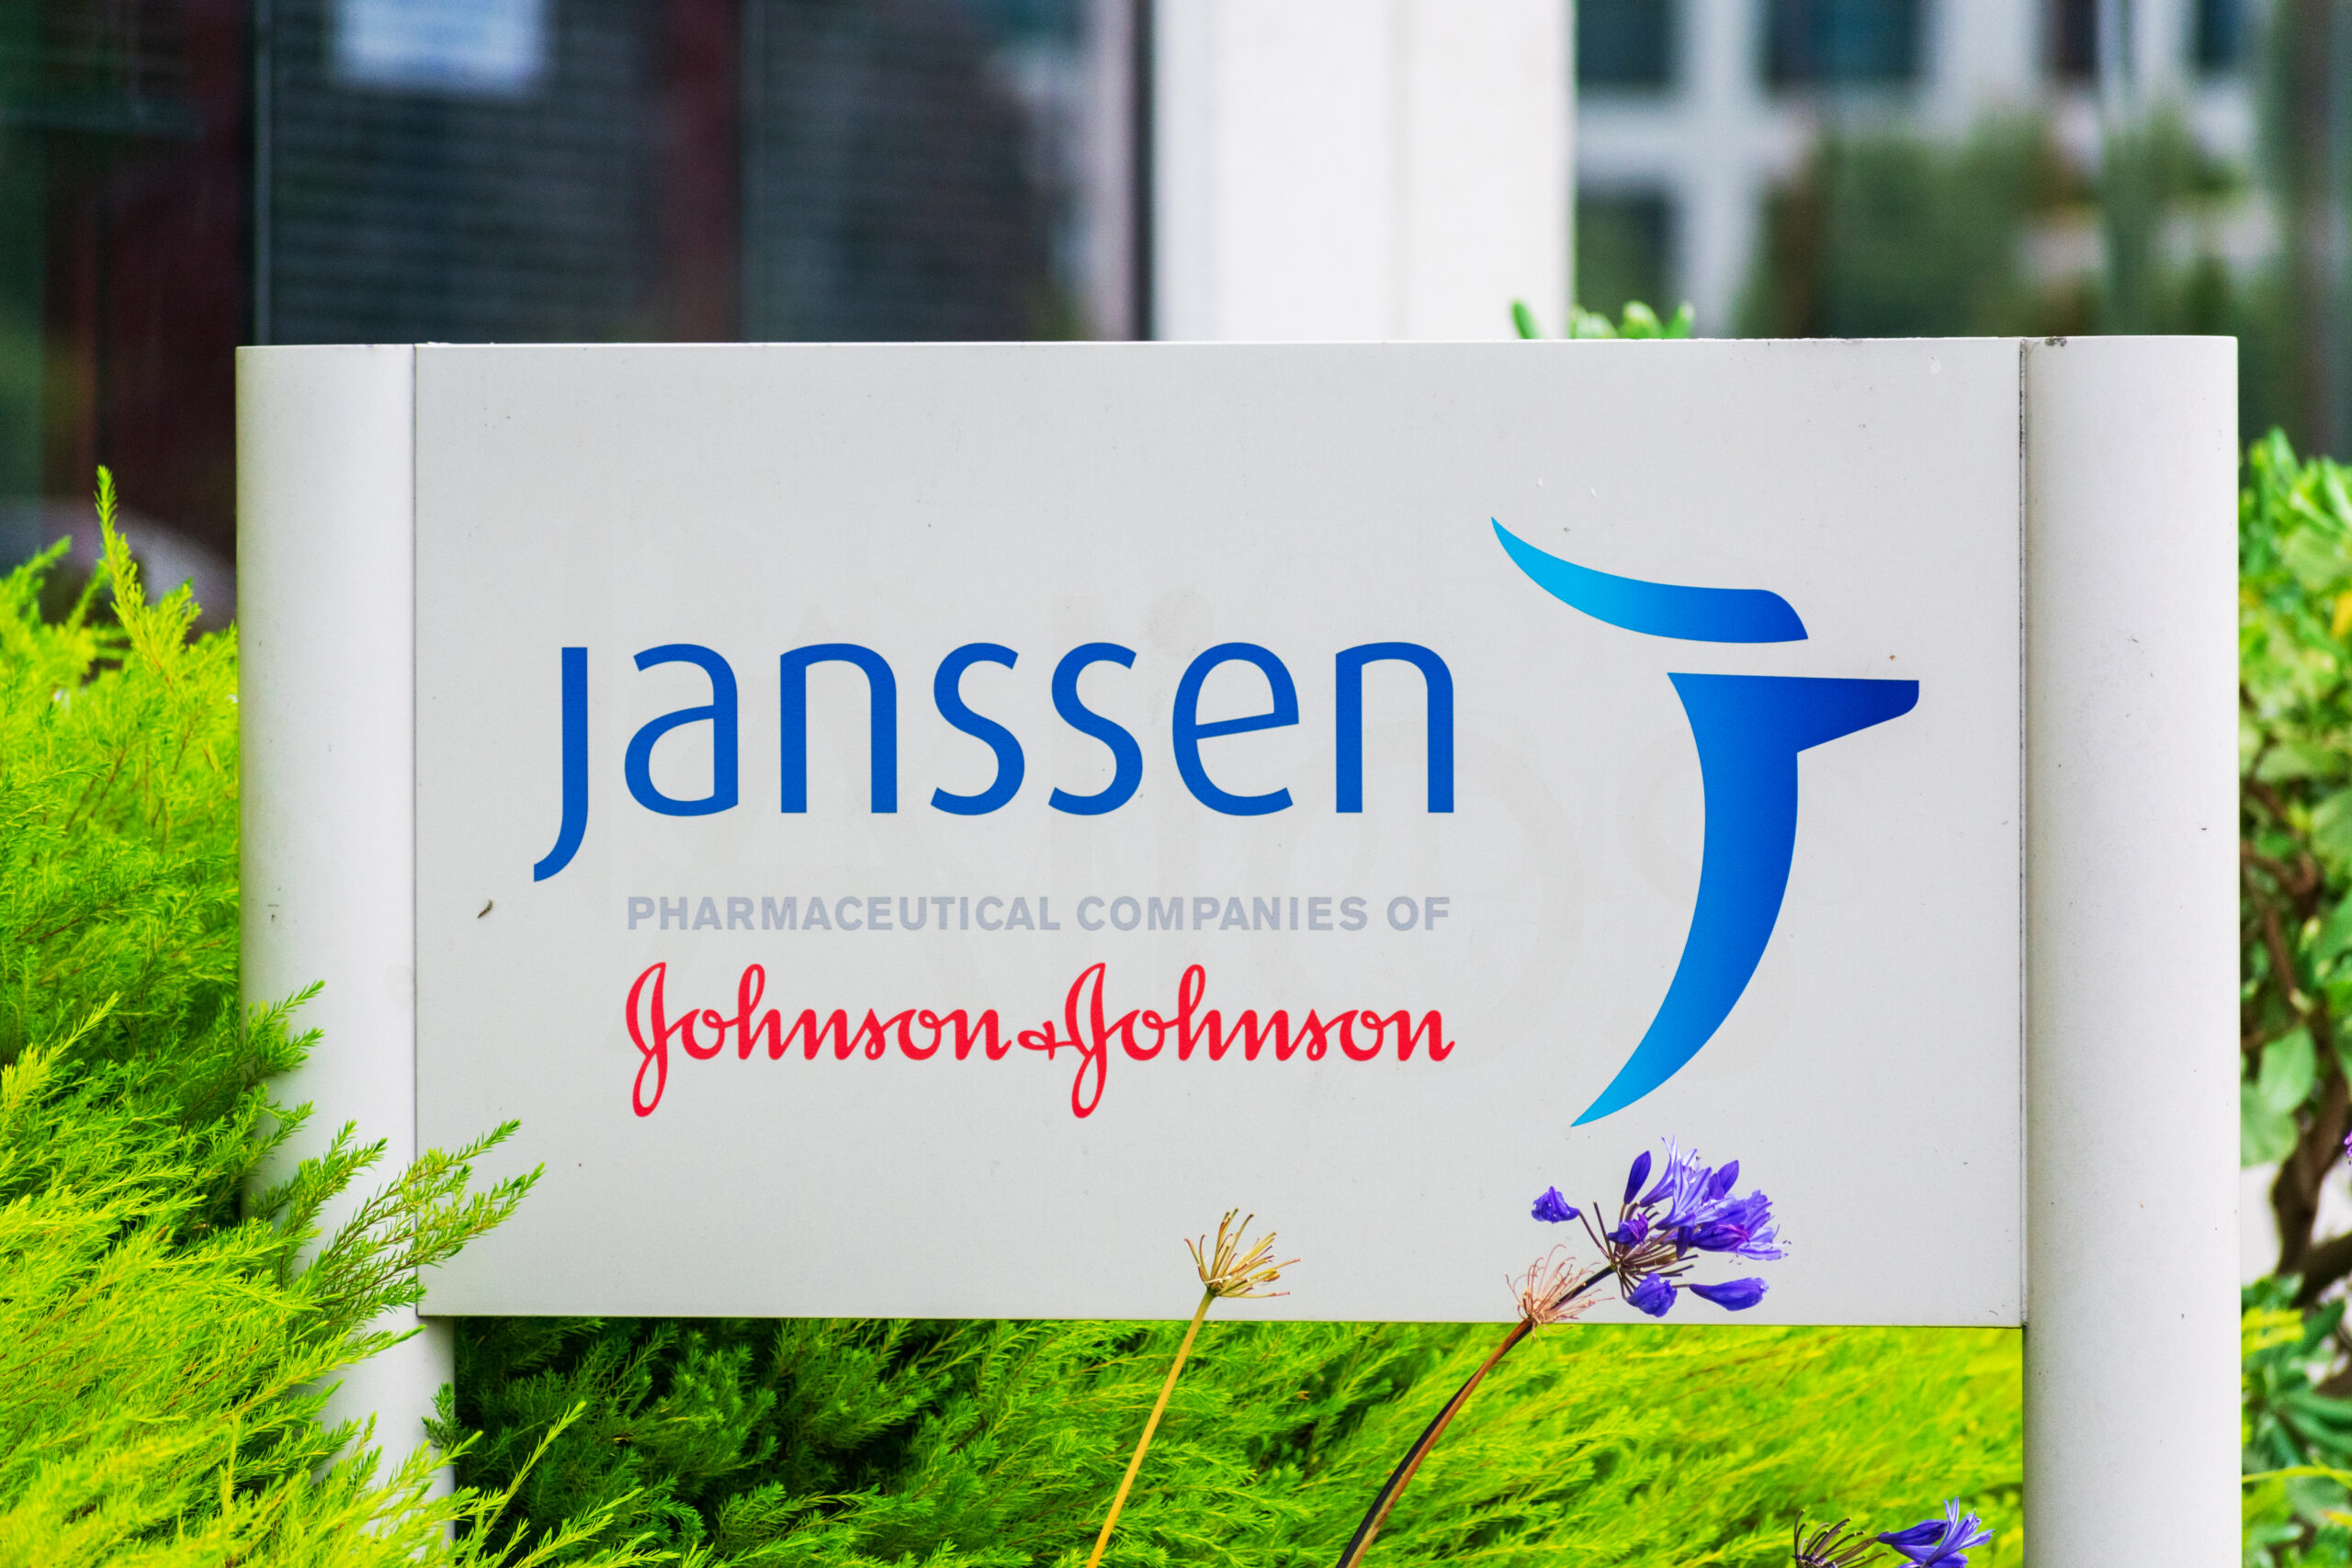 Saladax Signs Licensing Agreement with Janssen for Antipsychotic Drug Testing Patents